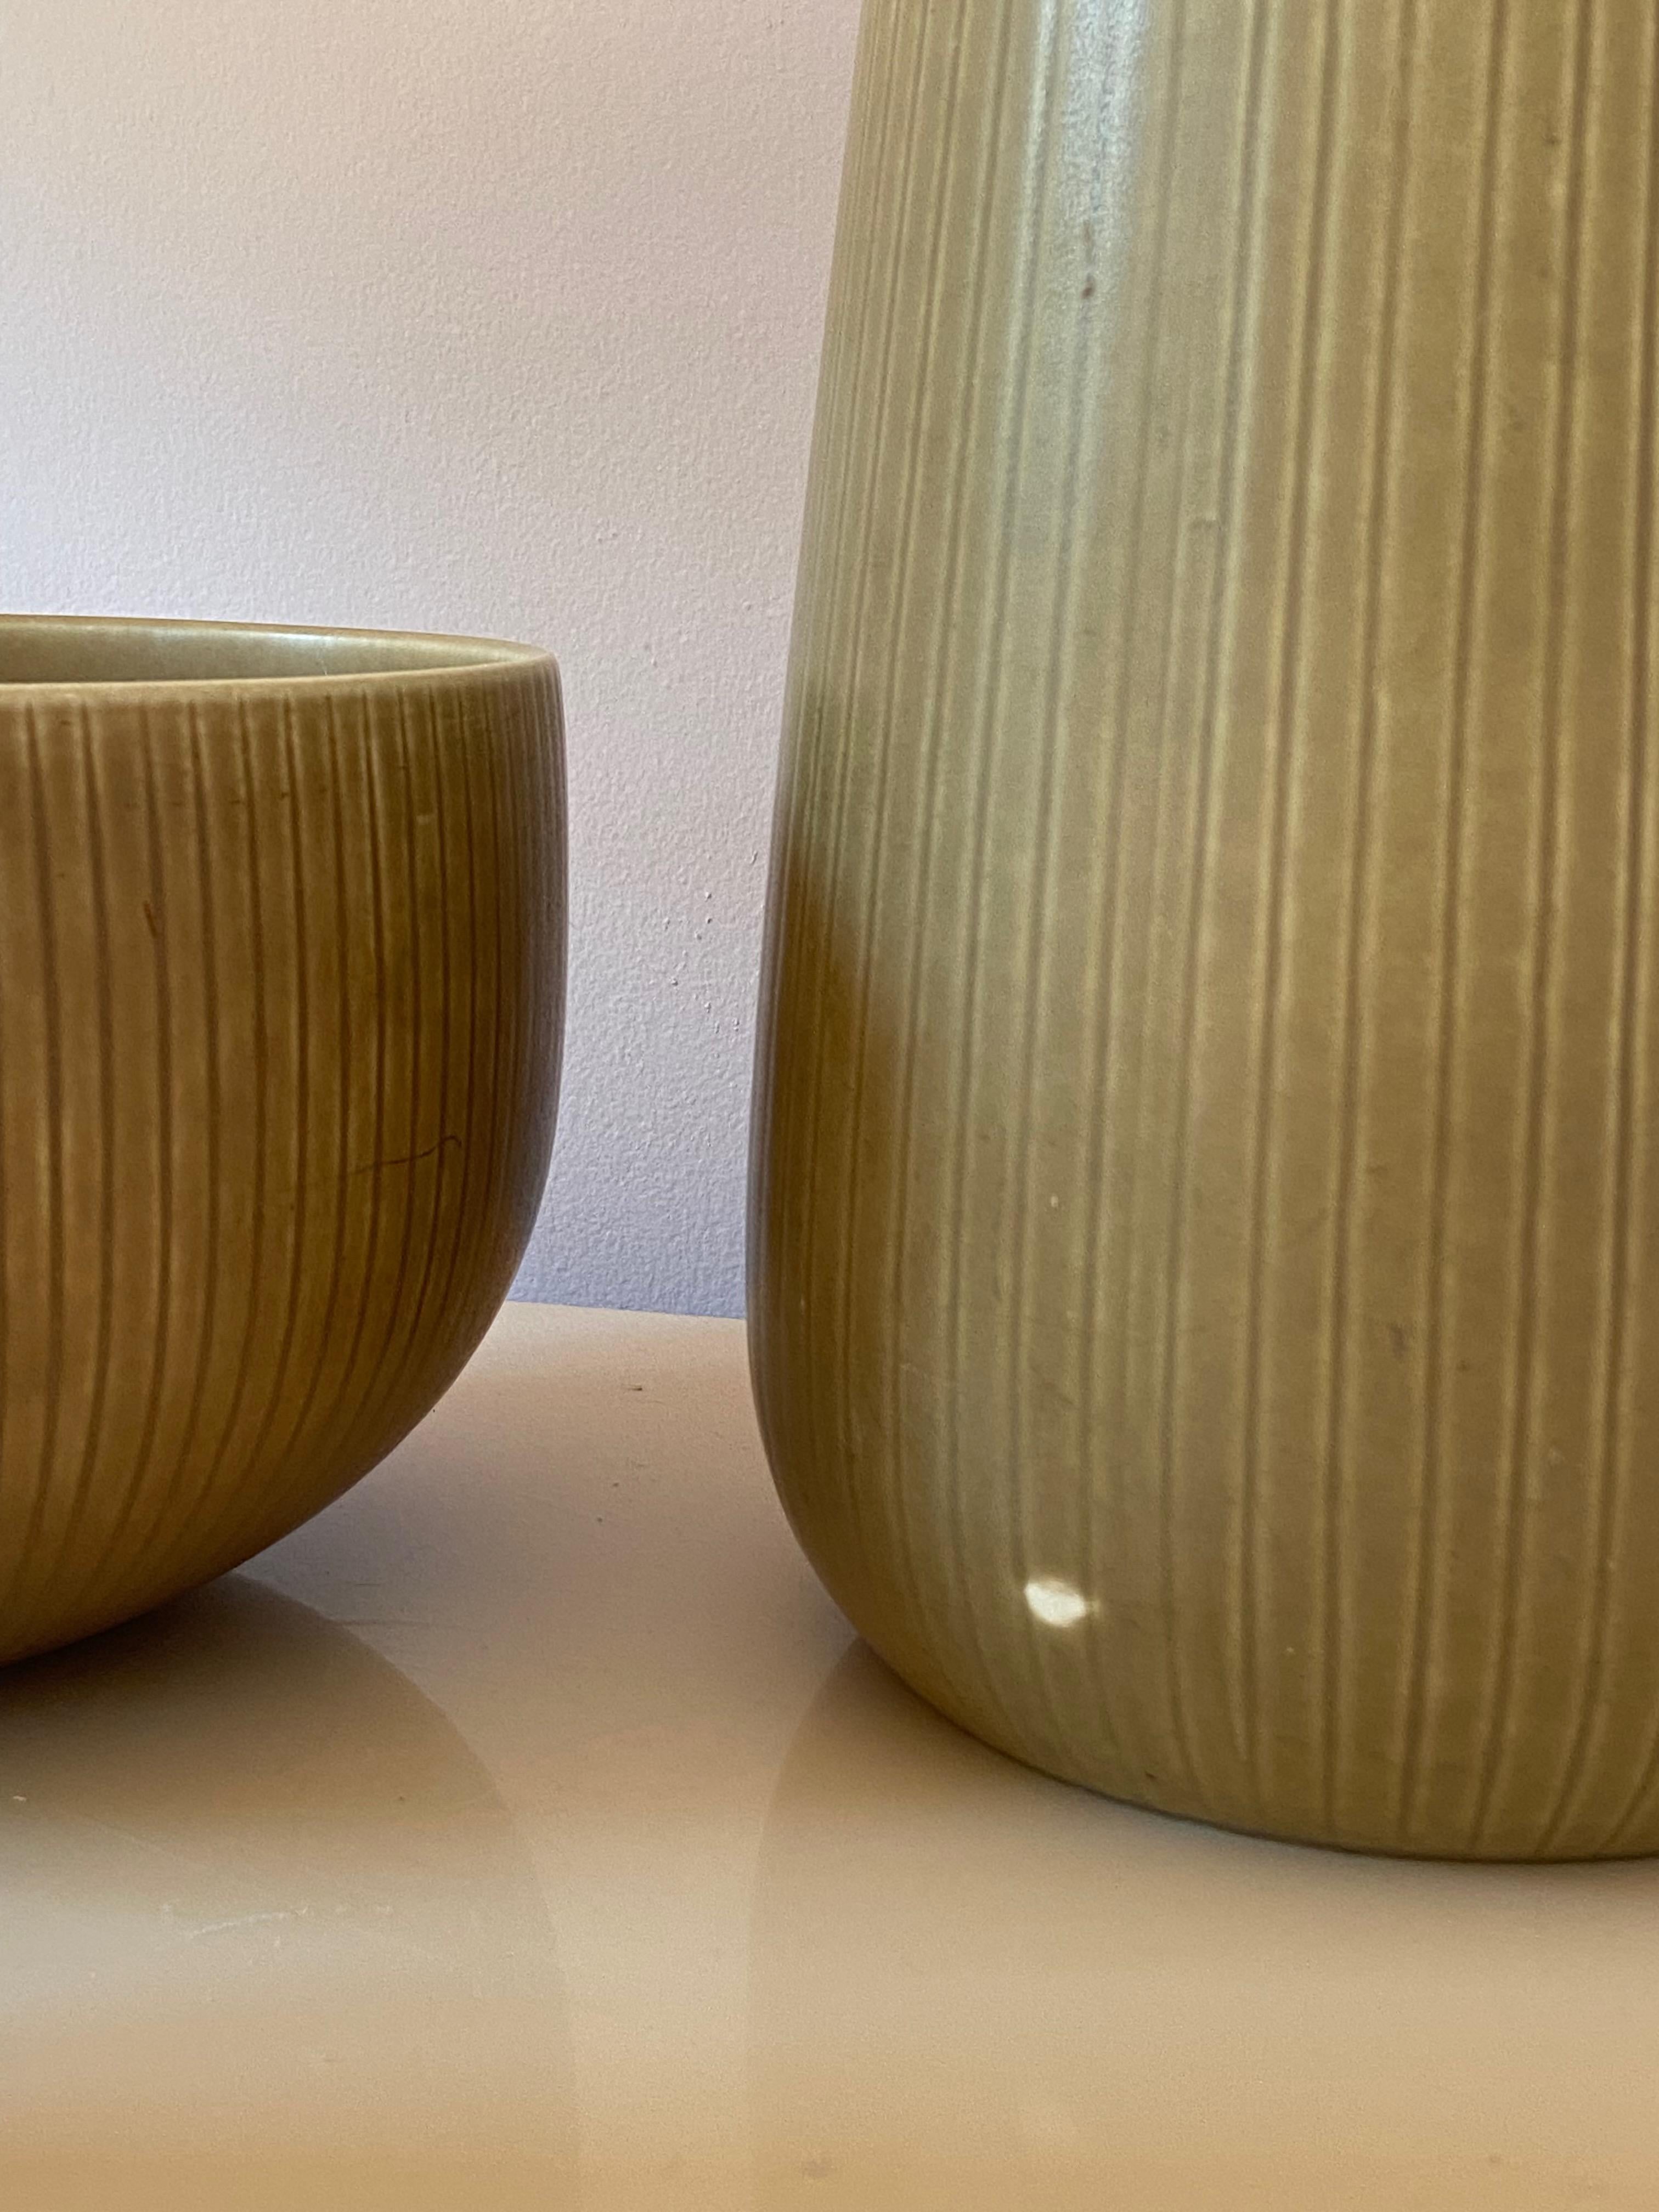 Set of 3 Rörstrand Ritzi Pottery Vases and Bowl by Gunnar Nylund Sweden 1950s For Sale 3